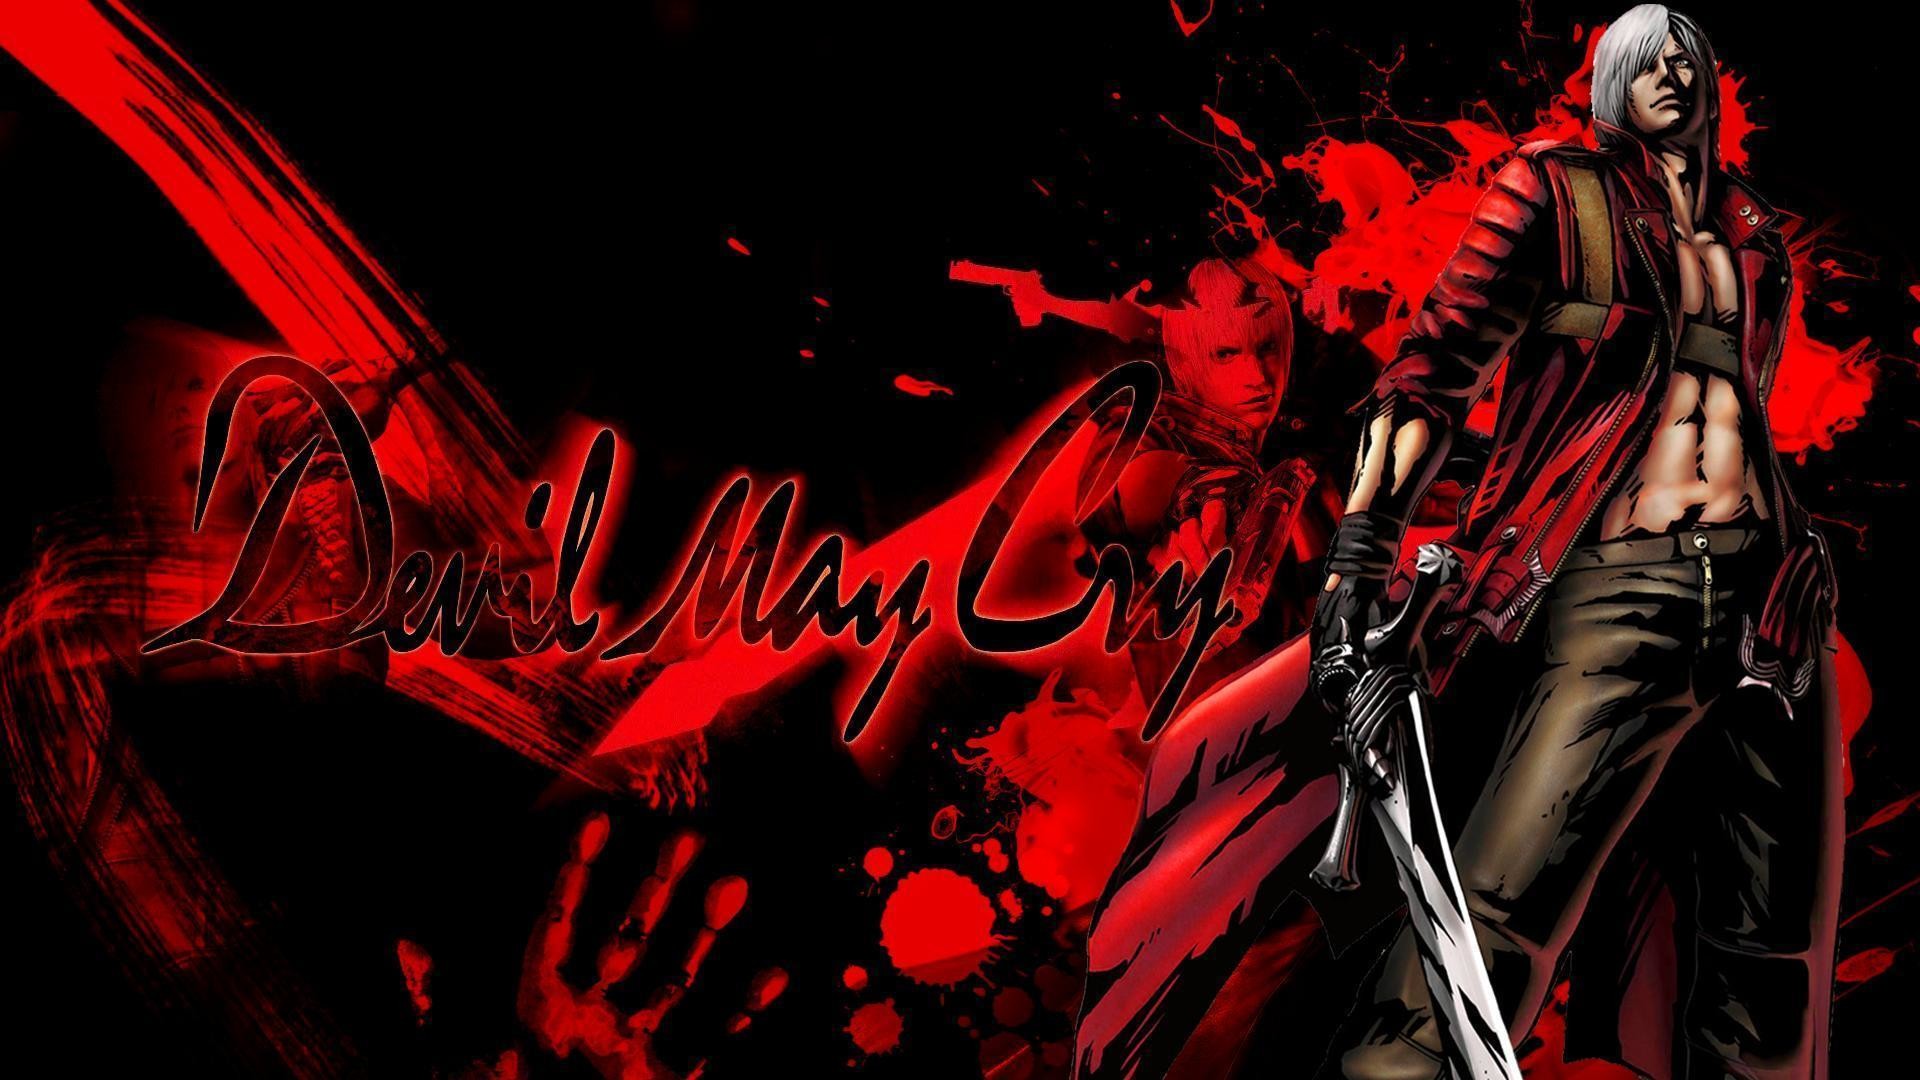 Wallpaper  Devil May Cry devil may cry 5 Dante Devil May Cry Nero Devil  May Cry 1357x1775  cuikai  1621945  HD Wallpapers  WallHere